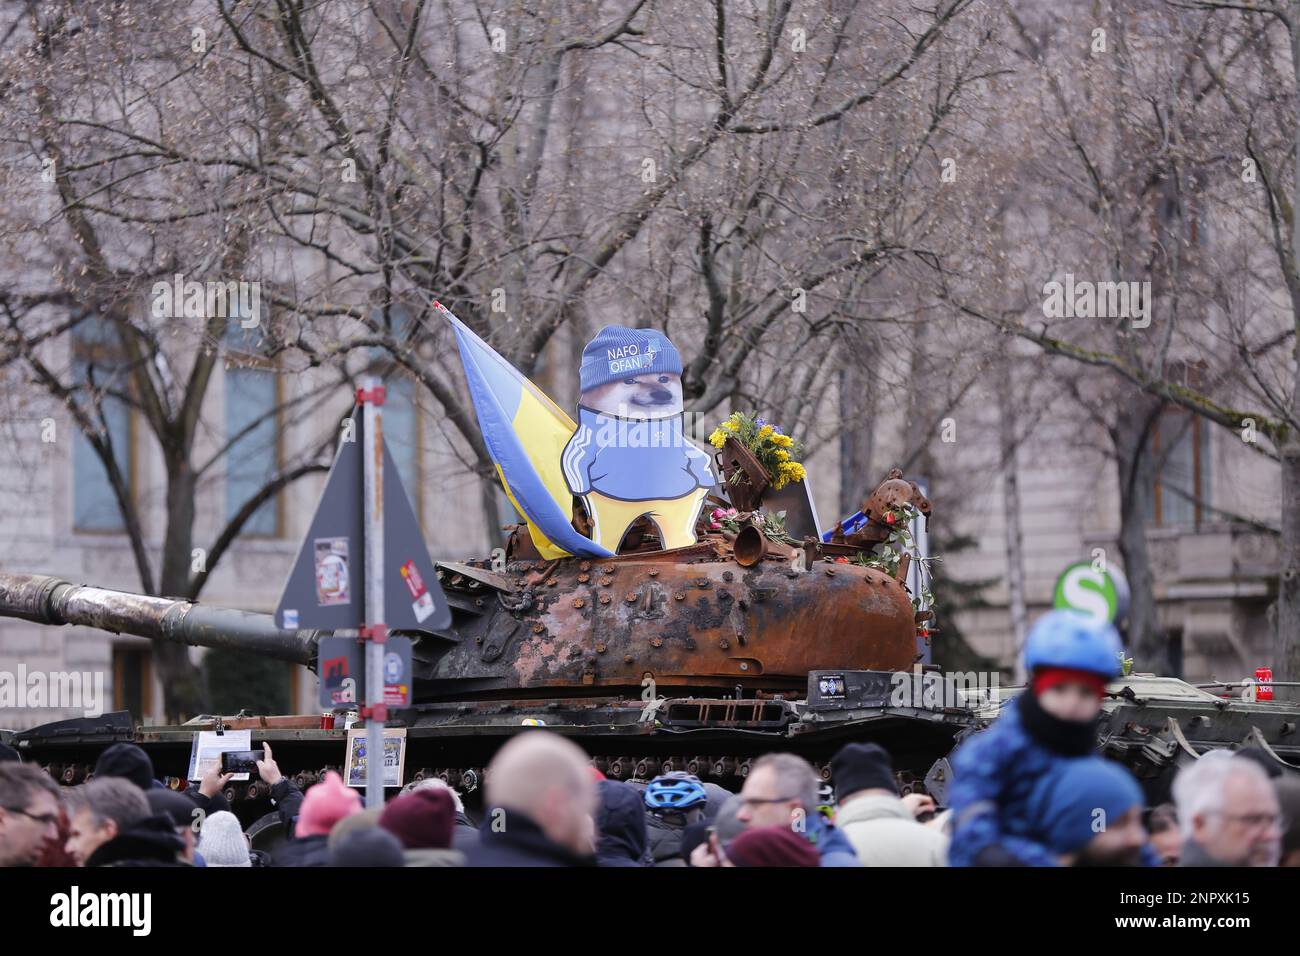 Berlin, Berlin-Mitte, Germany. 26th Feb, 2023. Destroyed tank in Berlin: Activists parked the wreckage of a Russian T-72 tank with a semi-trailer on Unter den Linden boulevard - in front of the Russian embassy. Destroyed tank in Berlin: Activists parked the wreckage of a Russian T-72 tank with a semi-trailer on the Unter den Linden boulevard - in front of the Russian embassy. The T-72 tank was secured in the Ukrainian village of Dmytrivka, outside of Kiev. It was exhibited in Berlin in the early morning of the anniversary of the beginning of the war. (Credit Image: © Simone Kuhlmey/Pacific Stock Photo